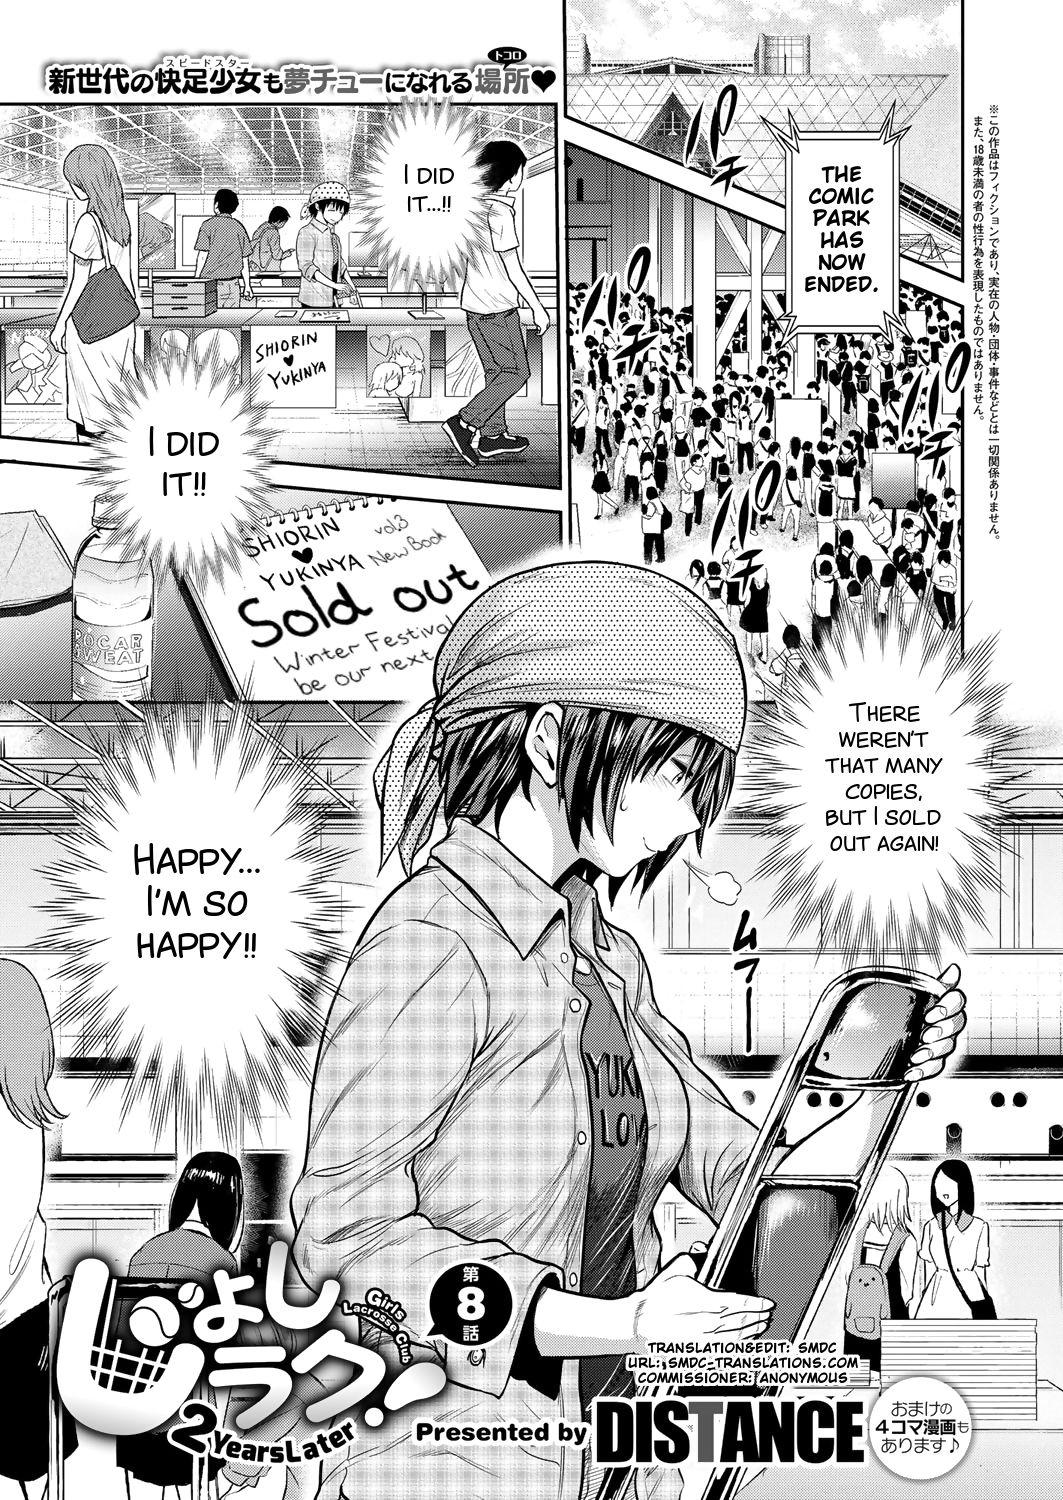 [DISTANCE] Joshi Luck! ~2 Years Later~ Ch. 7-8.5 [English] [SMDC] [Digital] 38